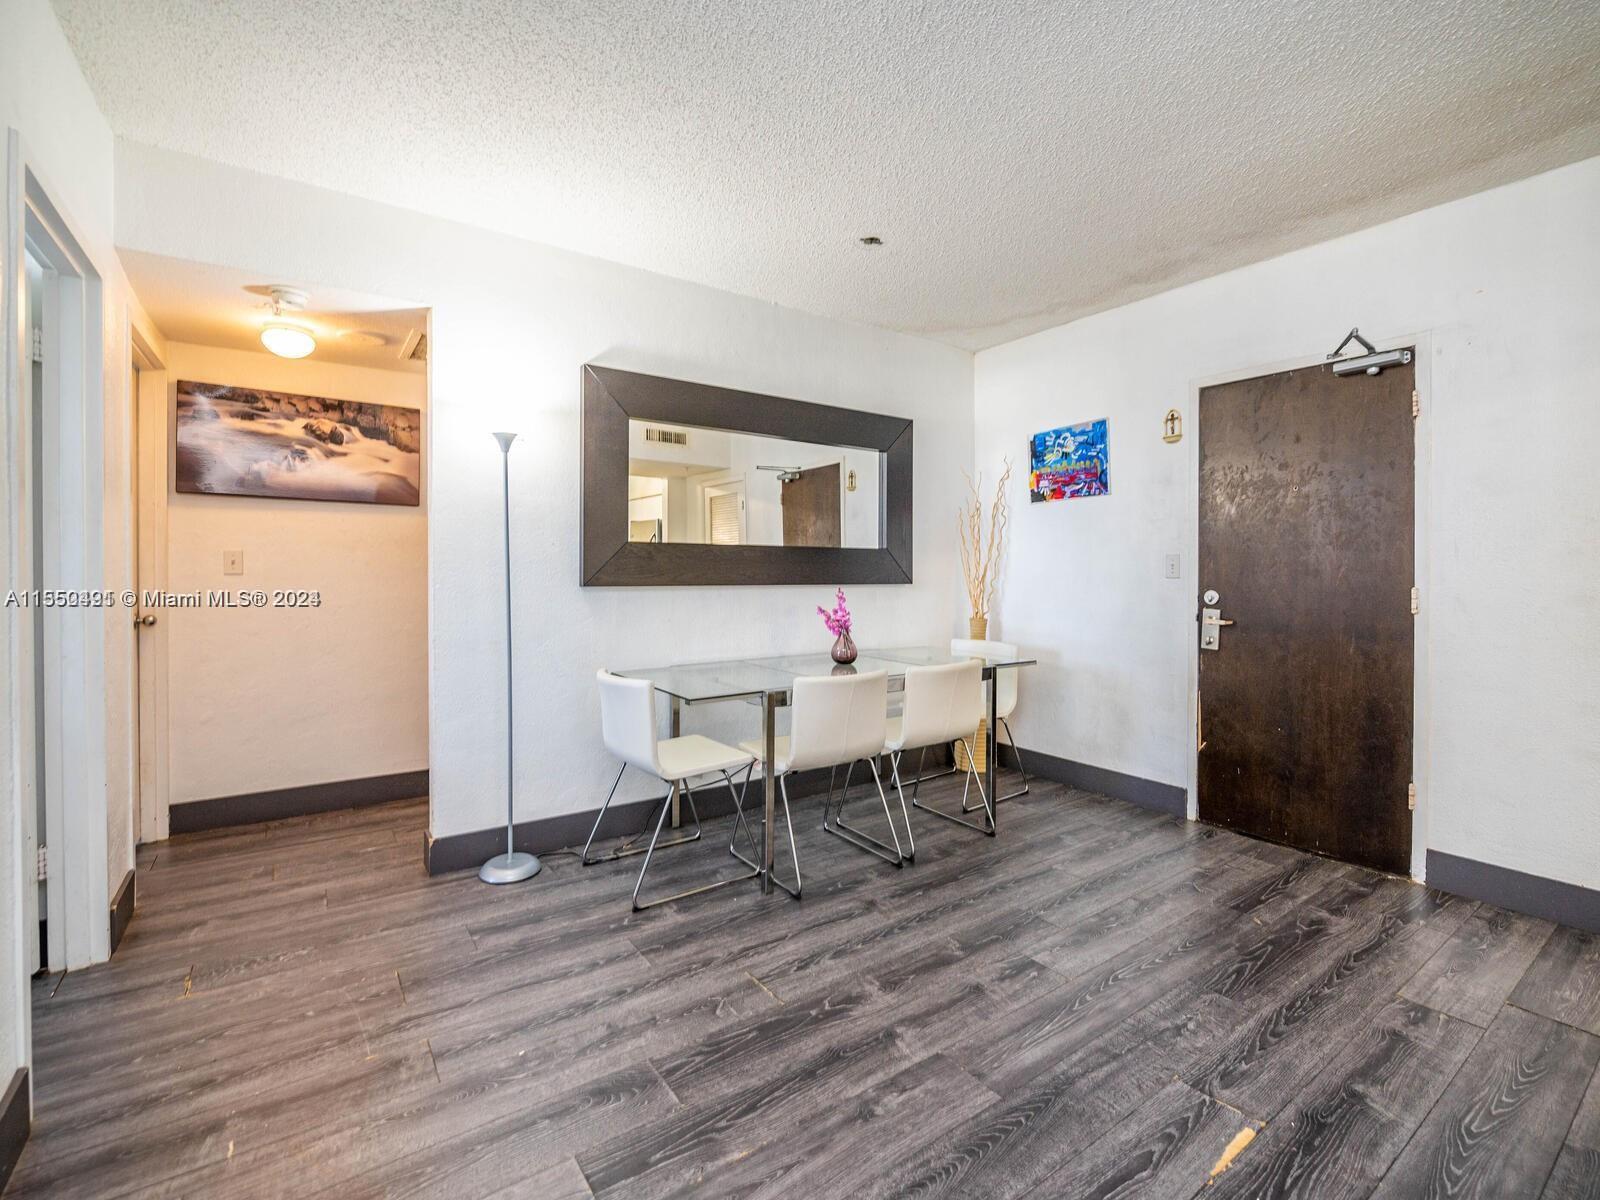 5 star building and campus. Largest 2/2 offered in Flamingo. Can rent monthly- 12x per yr. Corner unit-no buildings facing into your unit. Unobstructed panaromic ocean/city views from every room. Open kitchen, S/S appliances, Washer/dryer 2 seperate